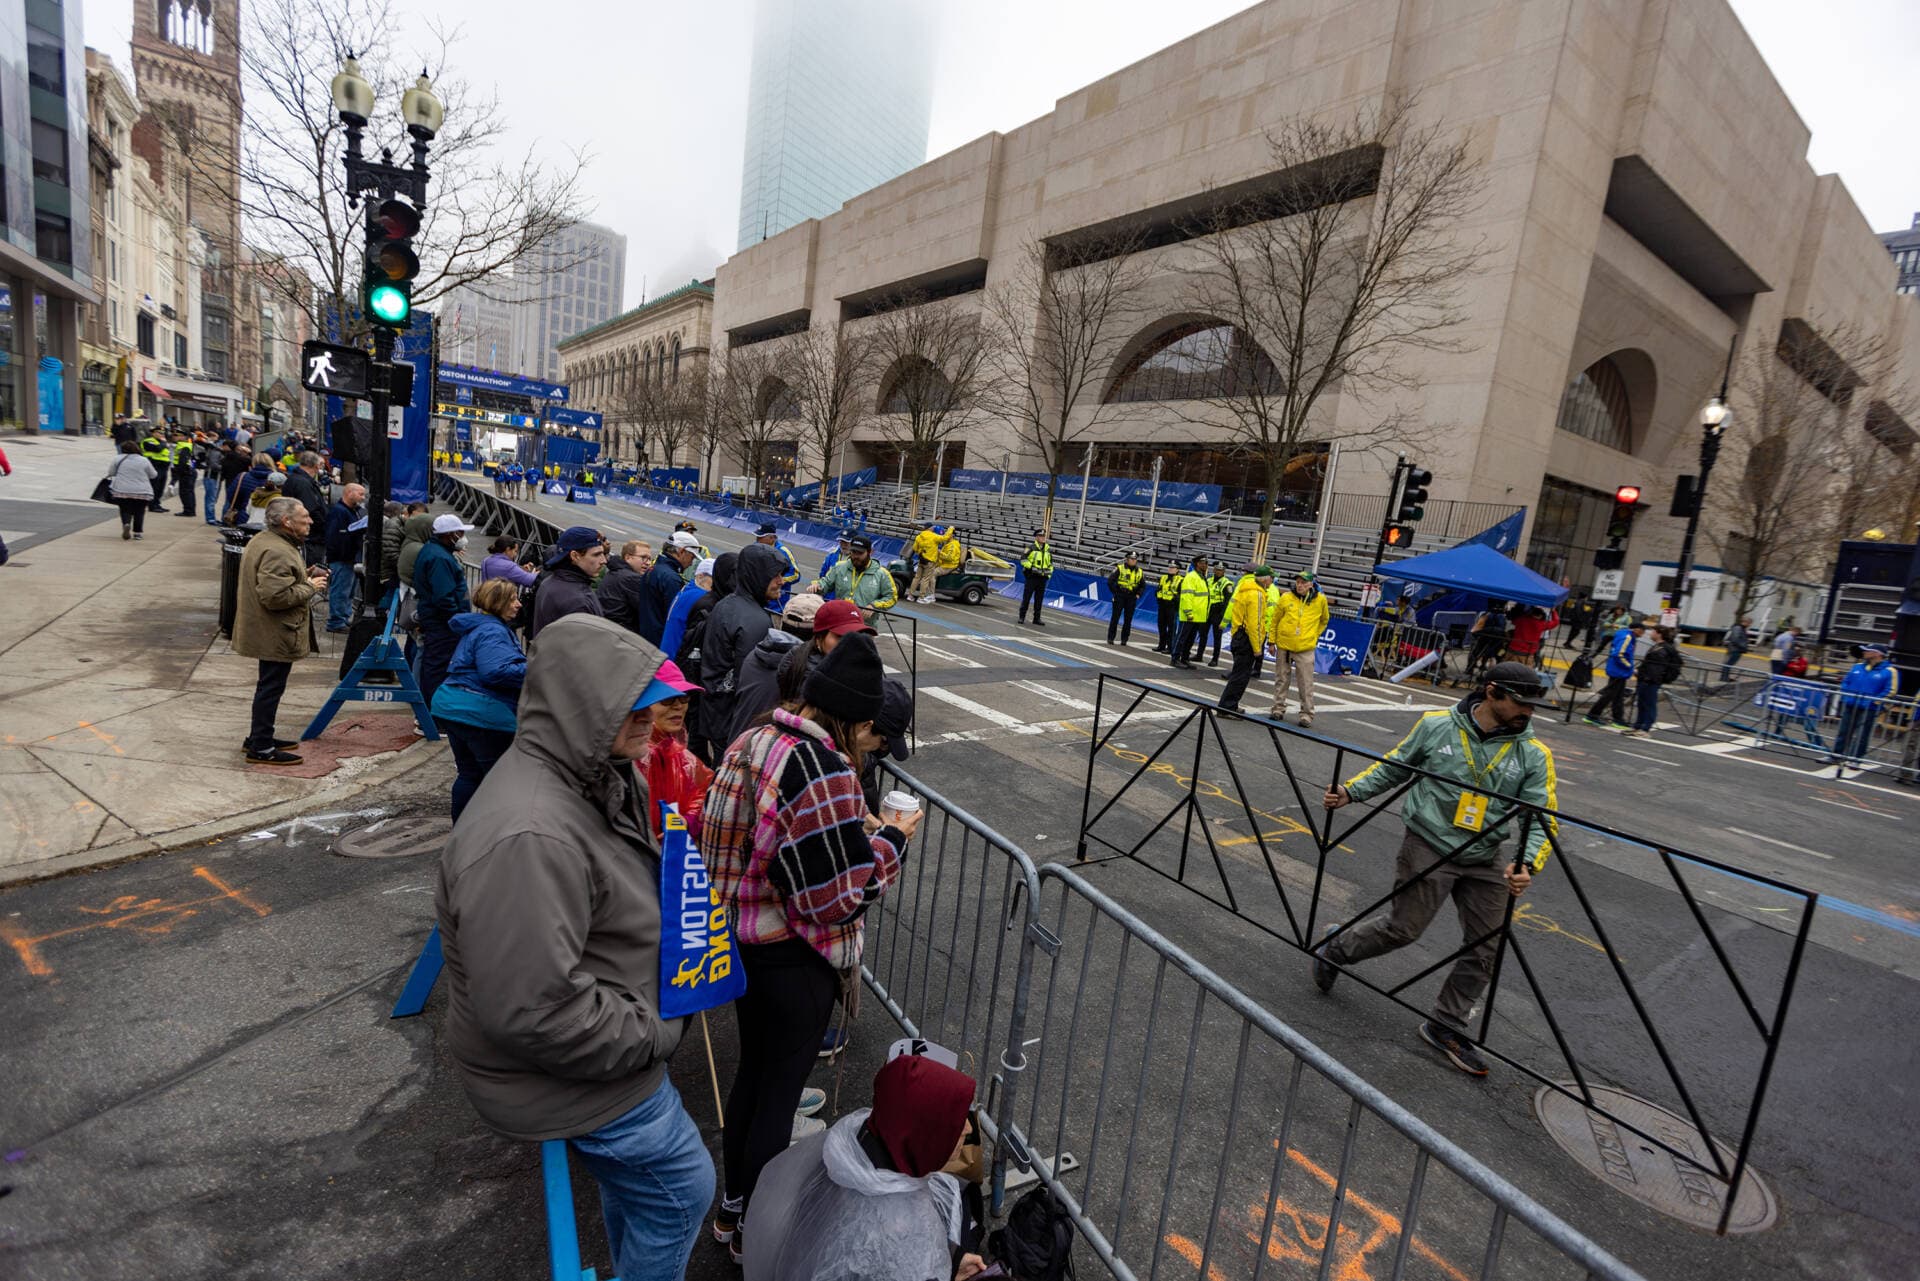 Spectators line the sides of Boylston Street waiting for the first runners to make their way downtown. (Jesse Costa/WBUR)